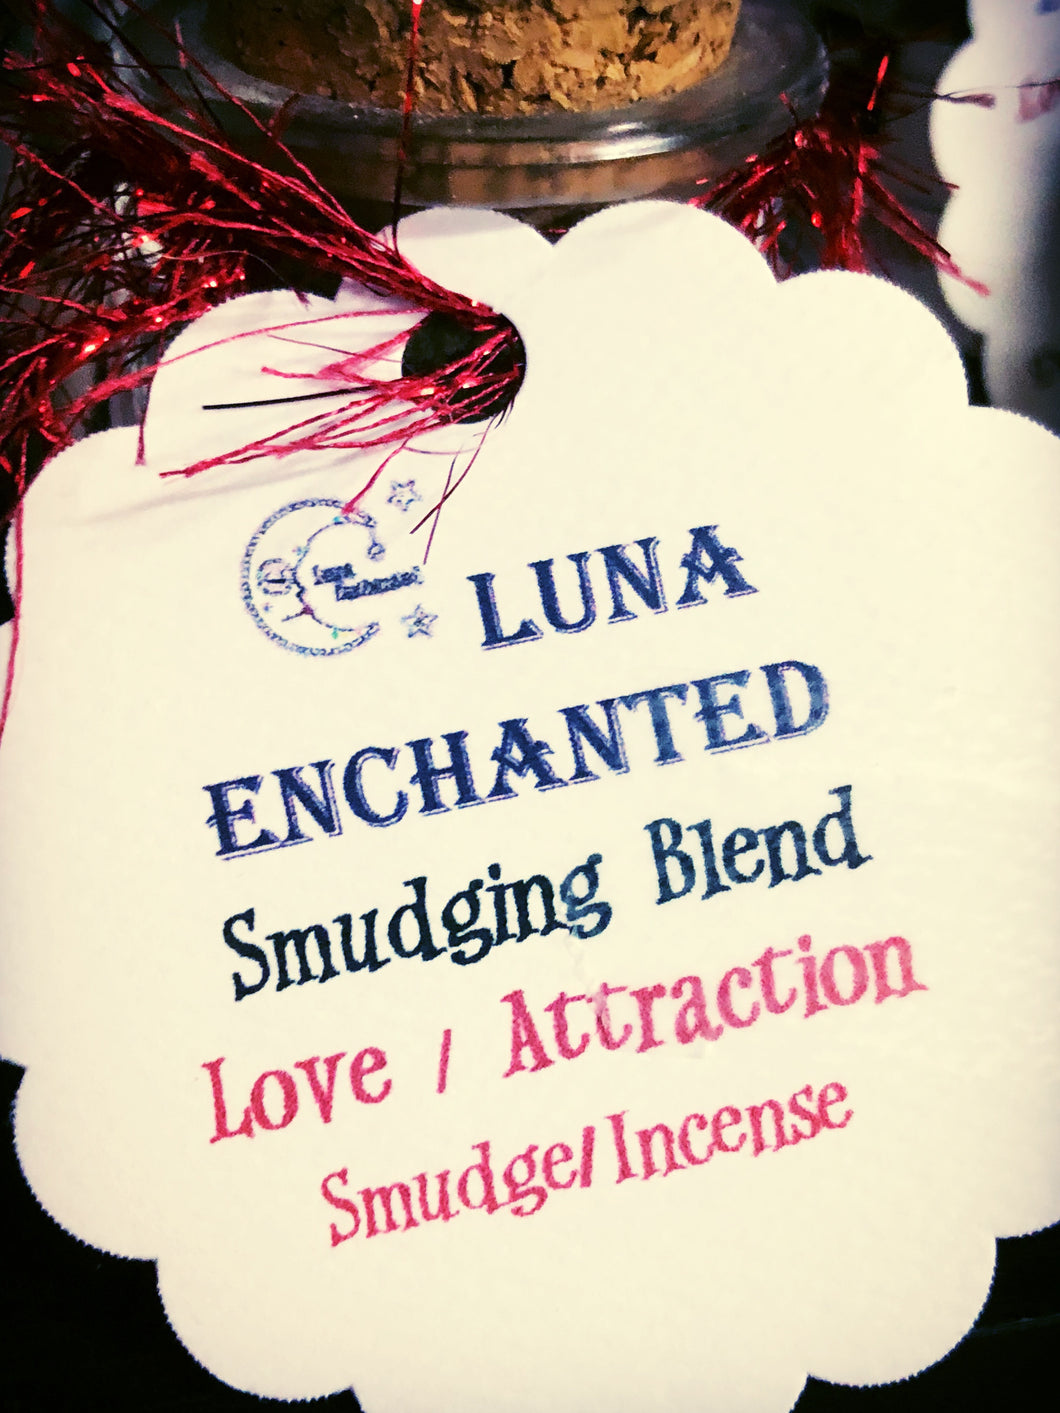 Love & Attraction Smudge Incense Blend